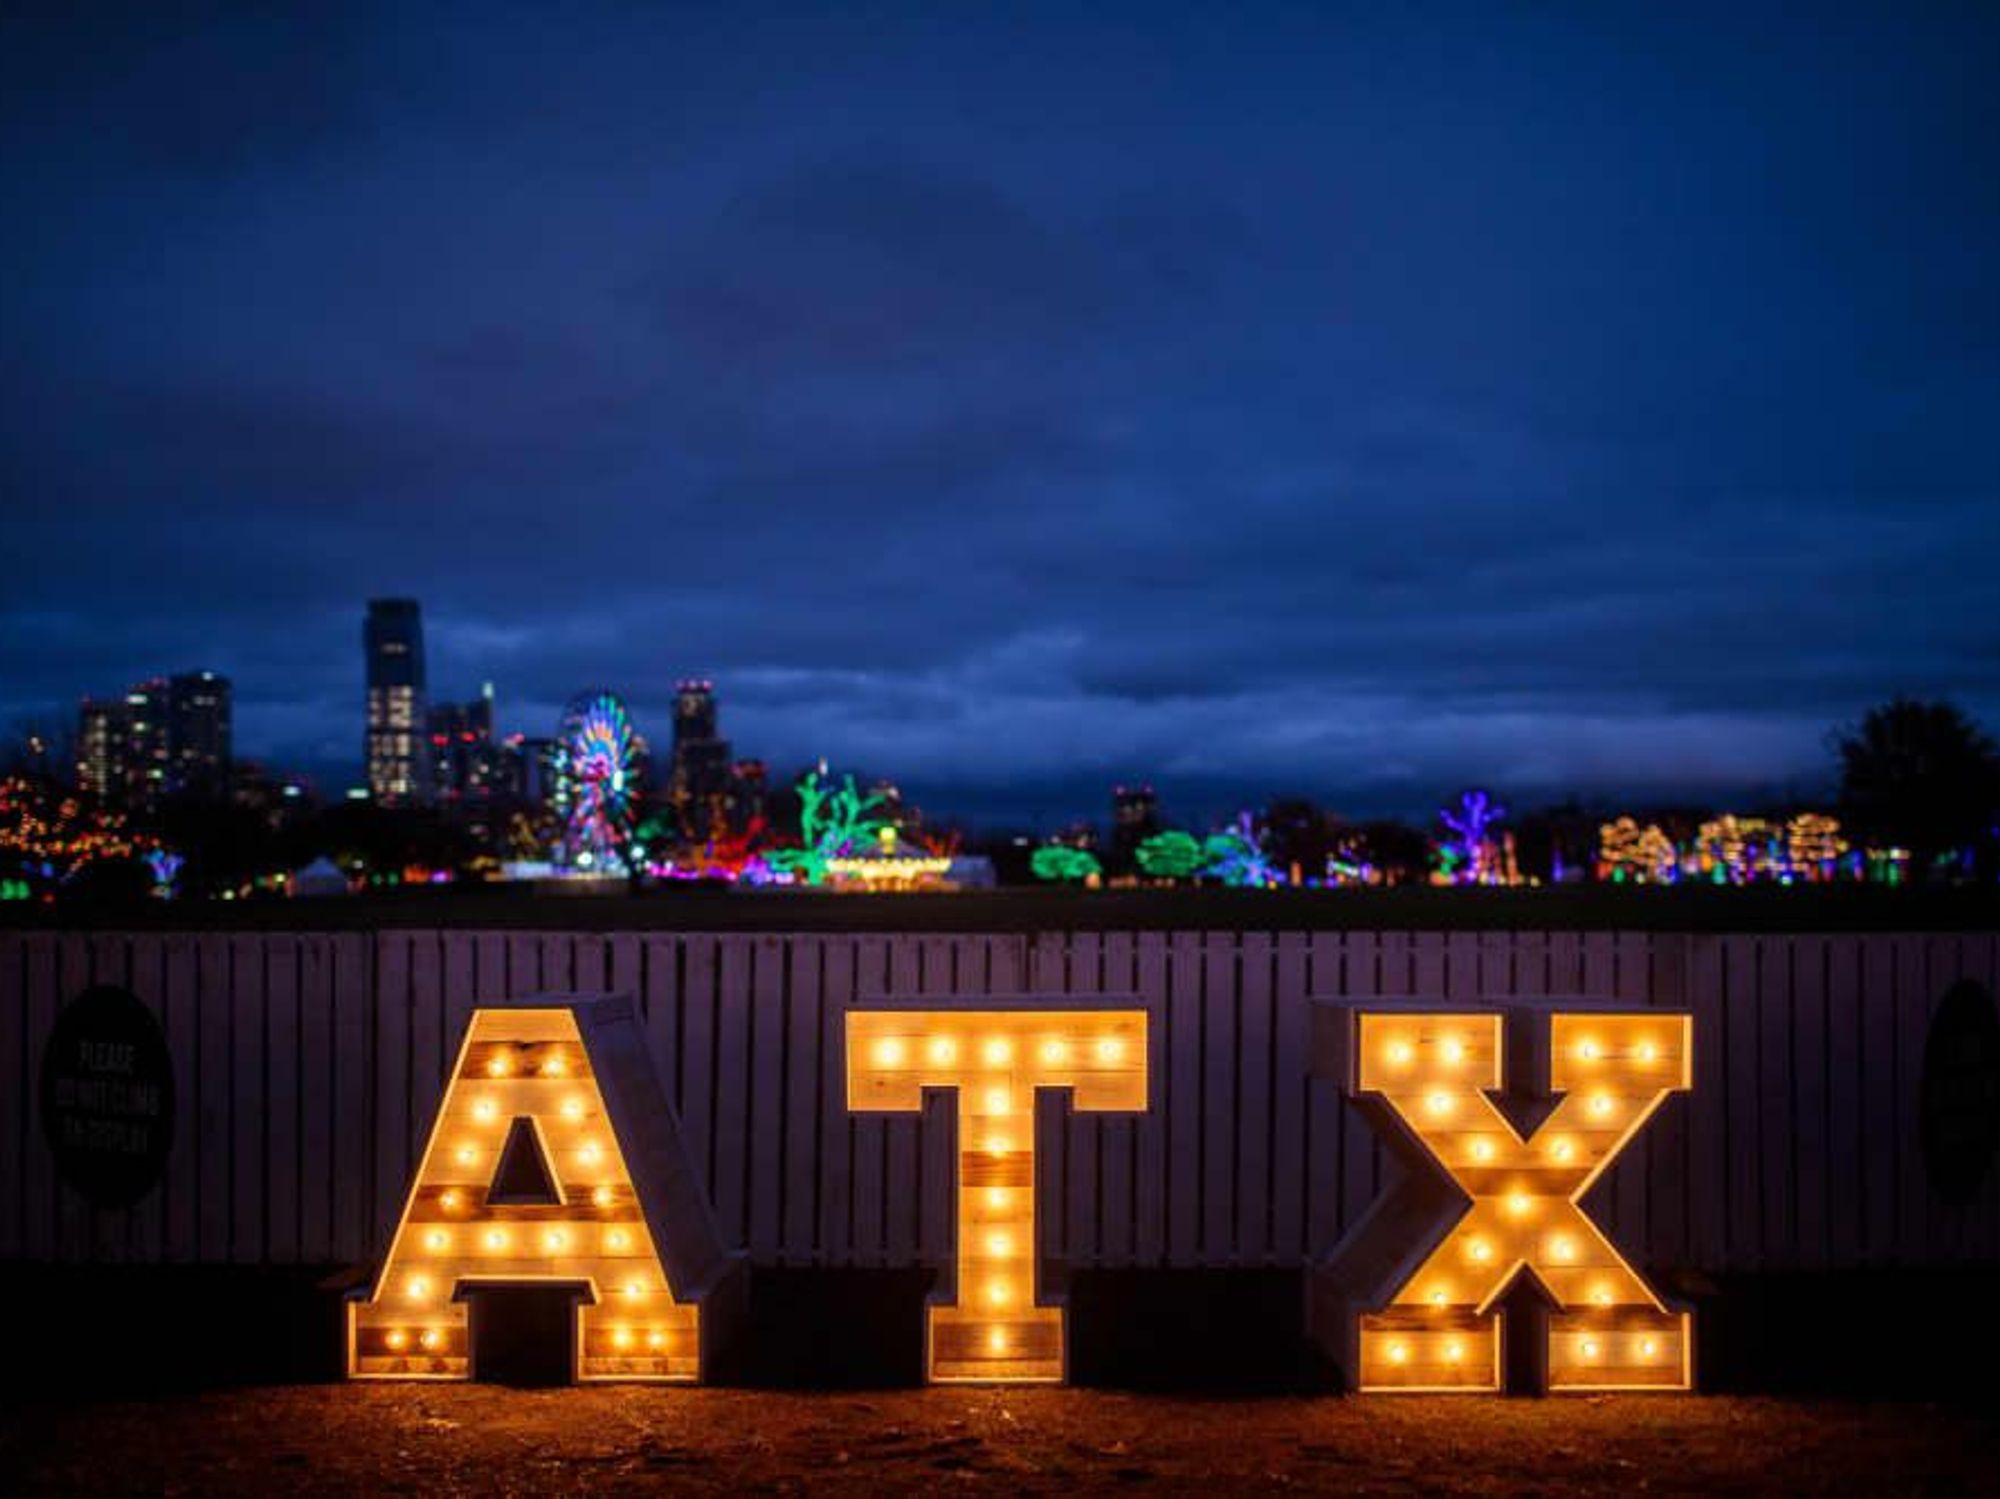 ATX sign with lights